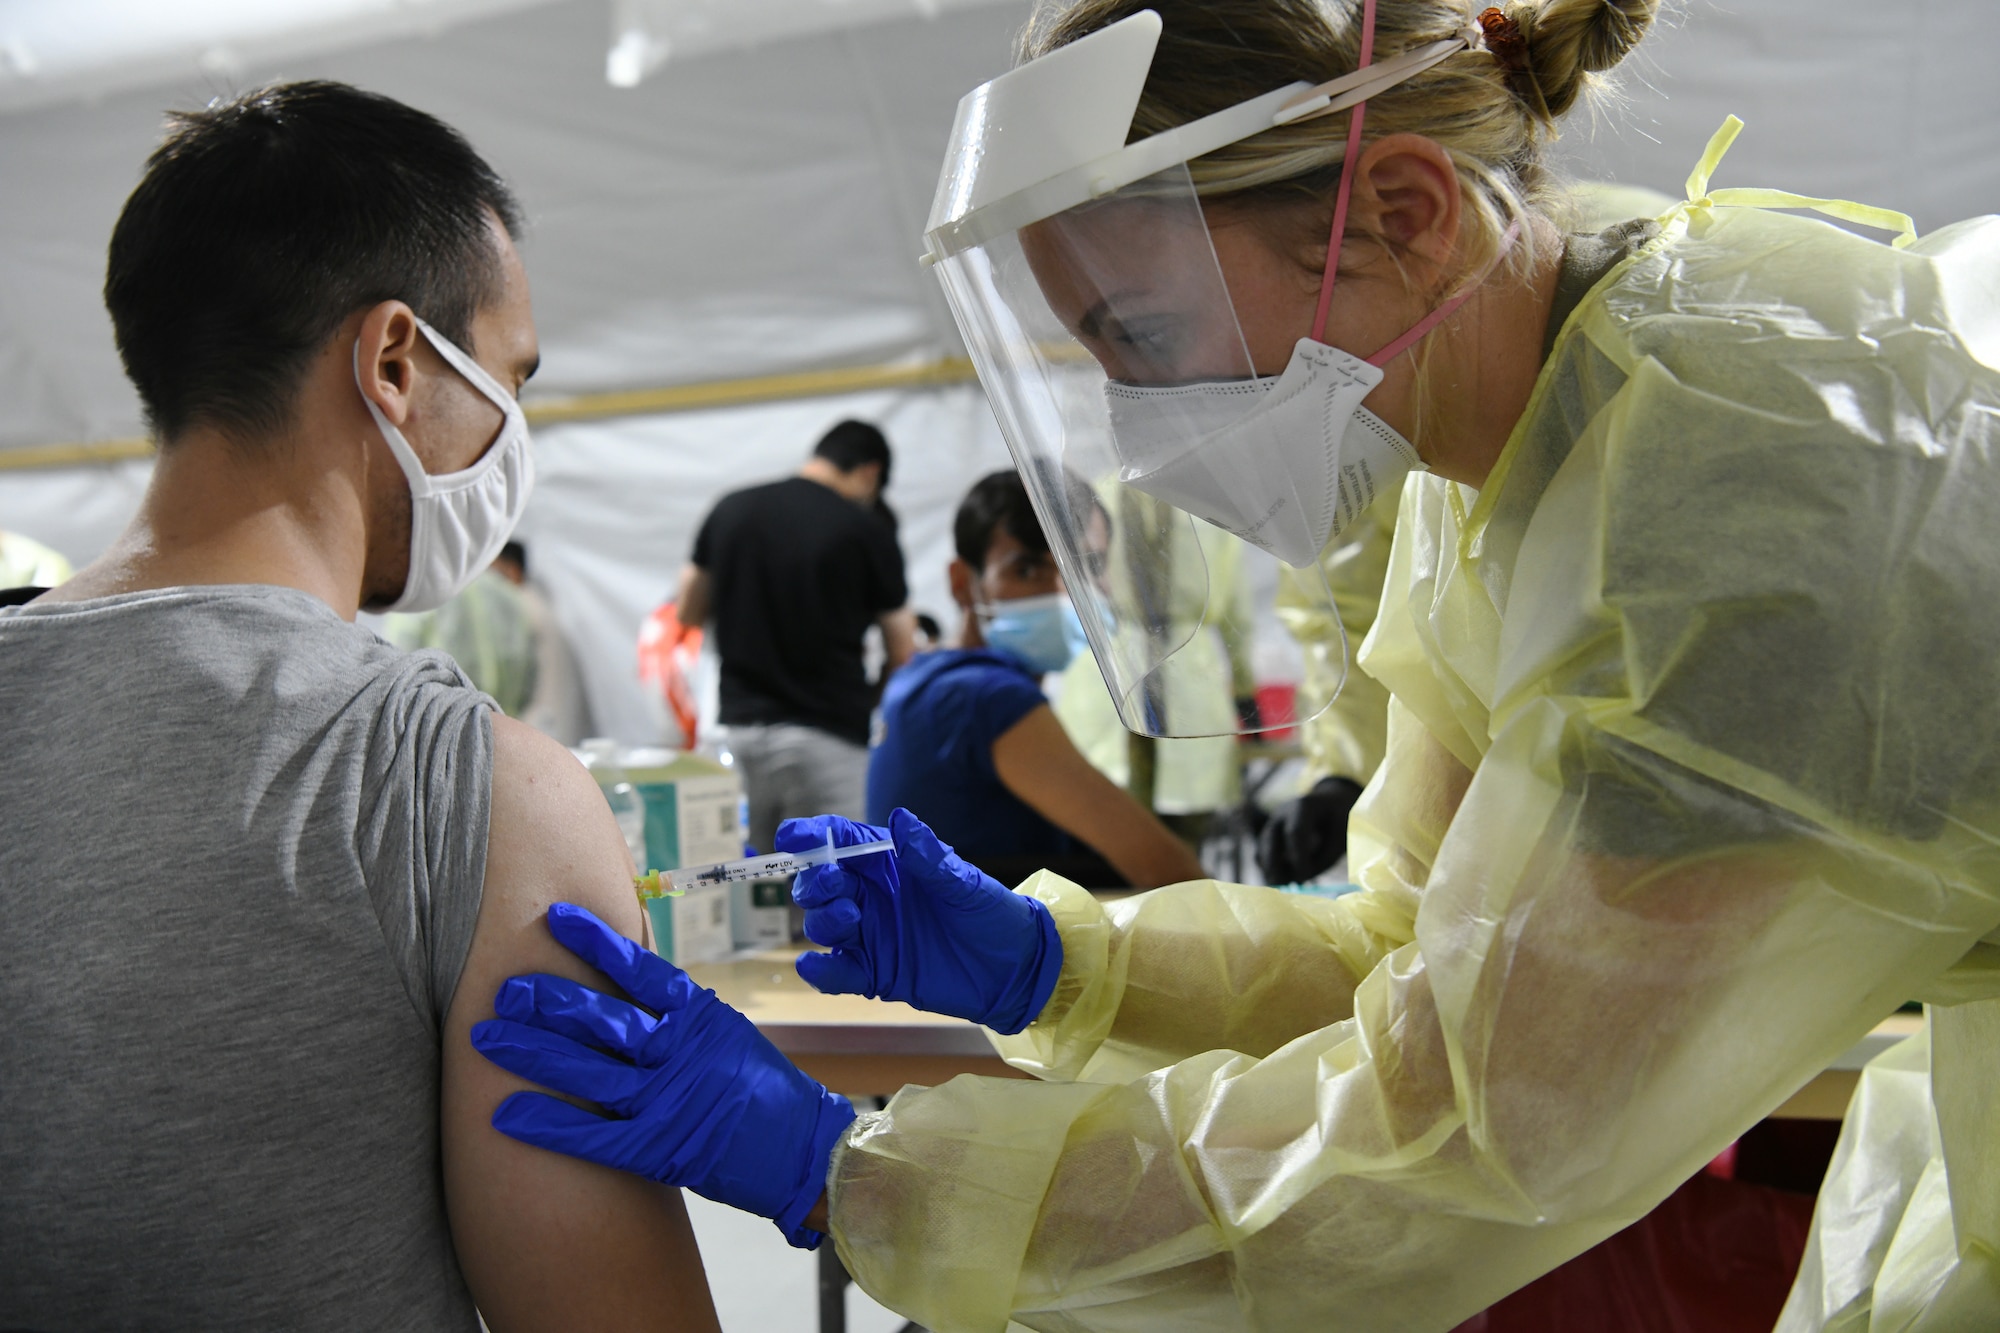 U.S. Air Force 1st Lt. Megan Busellato, assigned to the 445th Aeromedical Staging Squadron (ASTS), Wright-Patterson AFB, Dayton, Ohio, provides an immunization to an Afghan evacuee at Liberty Village, Joint Base McGuire-Dix-Lakehurst, New Jersey, Sept. 11, 2021.  The Department of Defense, through U.S. Northern Command, and in support of the Department of Homeland Security, is providing transportation, temporary housing, medical screening, and general support for at least 50,000 Afghan evacuees at suitable facilities, in permanent or temporary structures, as quickly as possible. This initiative provides Afghan personnel essential support at secure locations outside Afghanistan. (National Guard photo by Master Sgt. John Hughel, Washington Air National Guard)